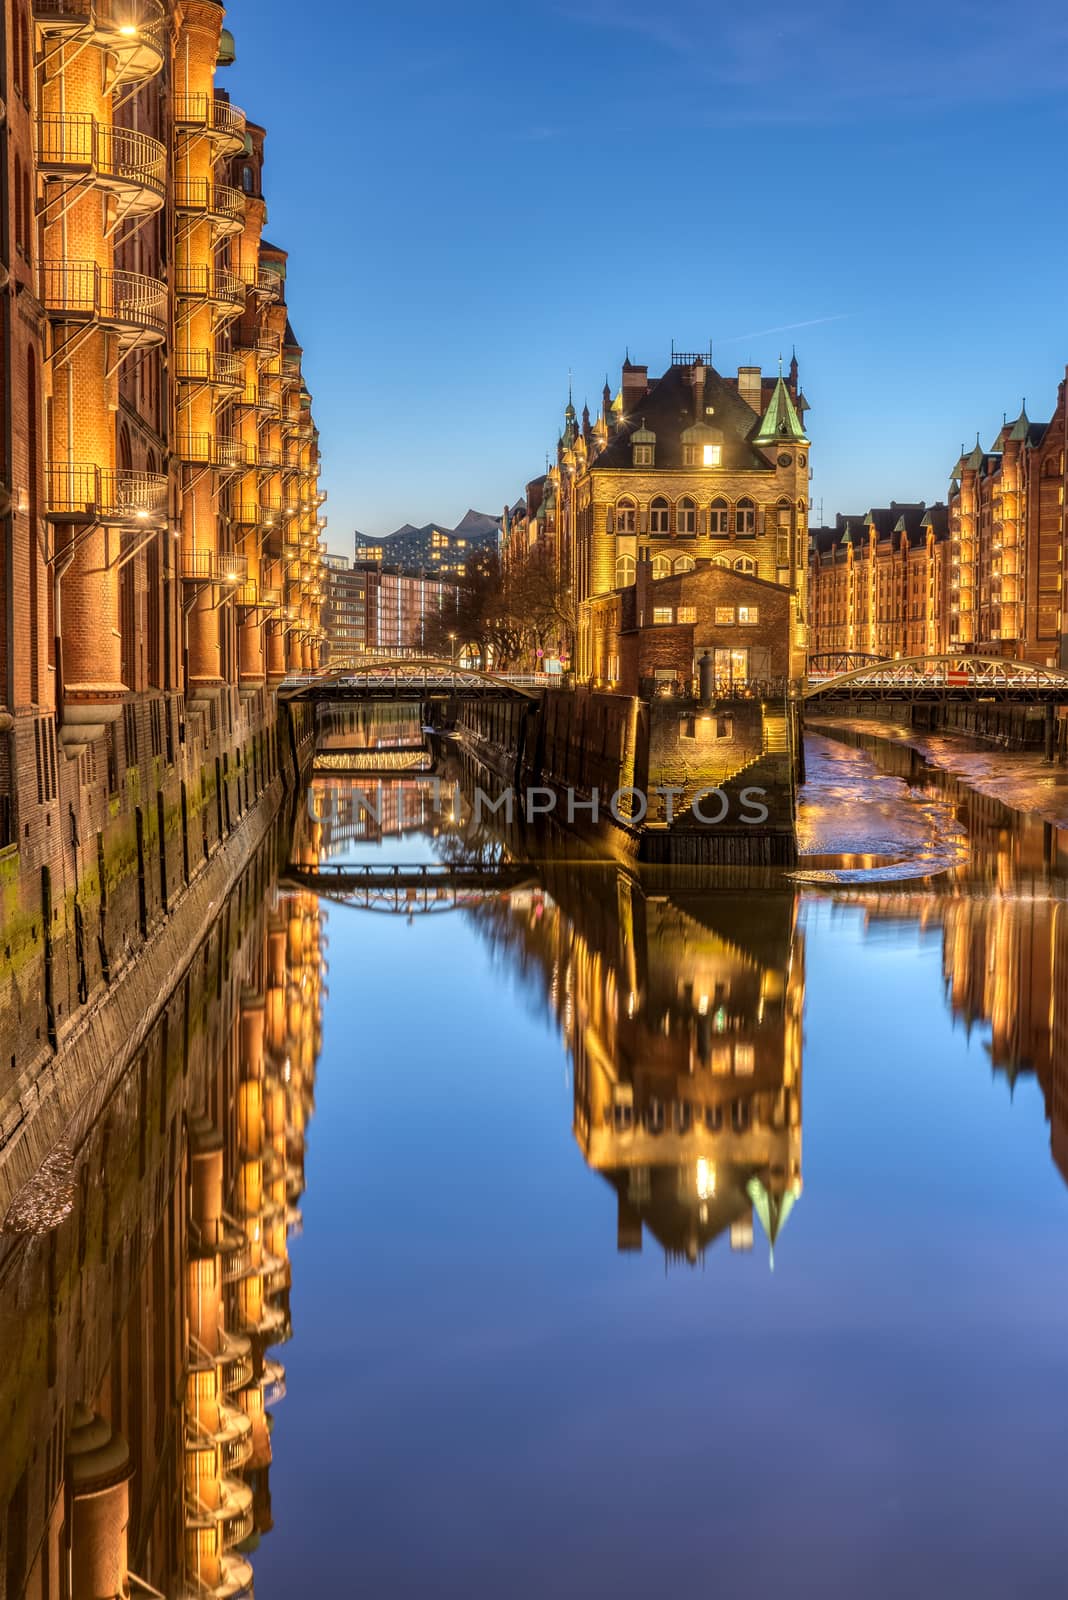 The red warehouses in the Speicherstadt in Hamburg at night